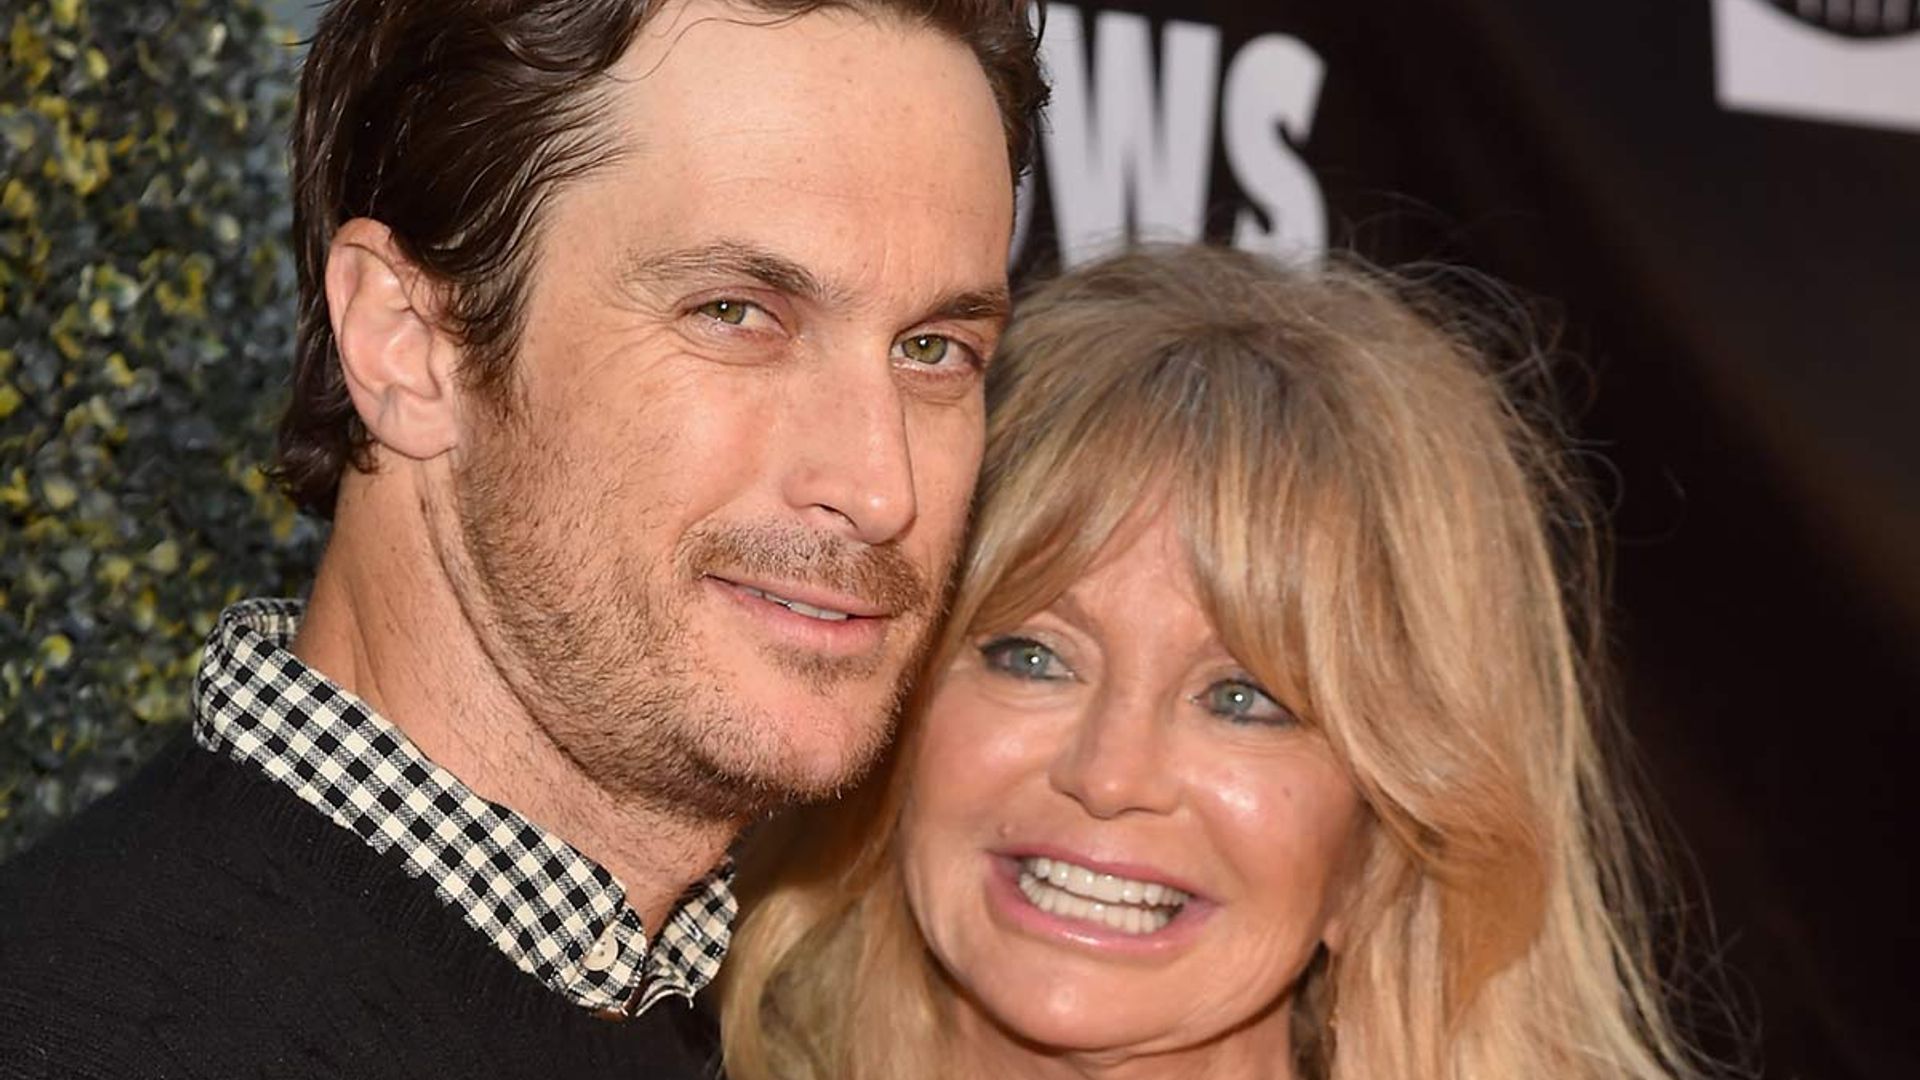 Oliver Hudson reveals why Goldie Hawn and Kate Hudson are 'mad' at him